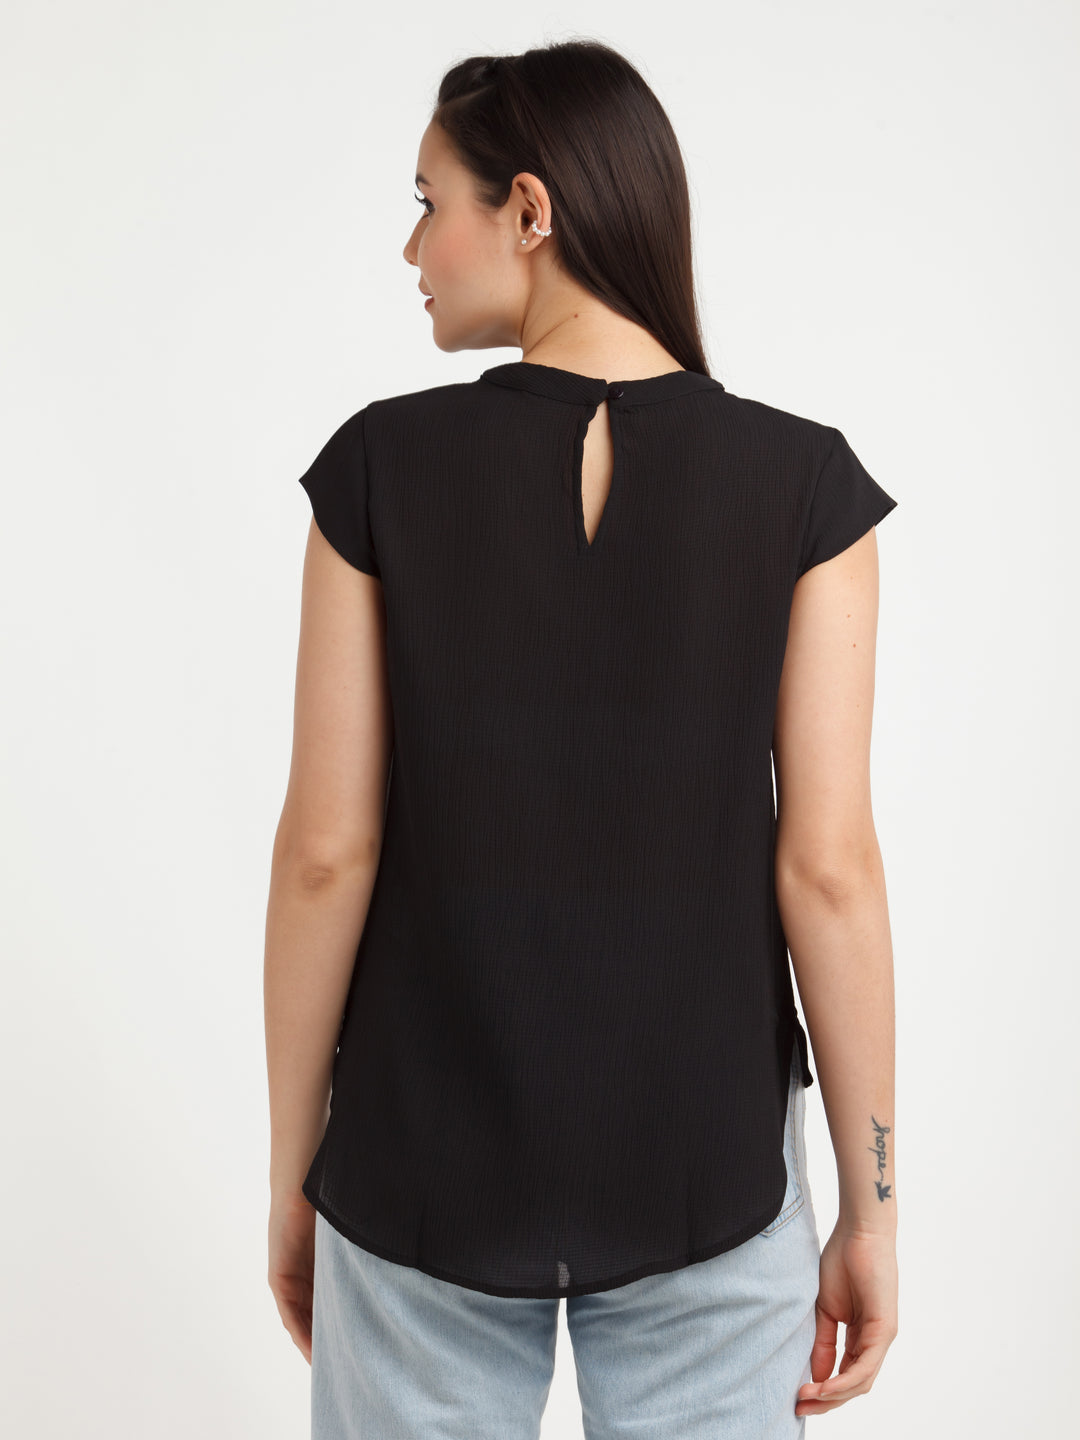 Black Solid Top For Women